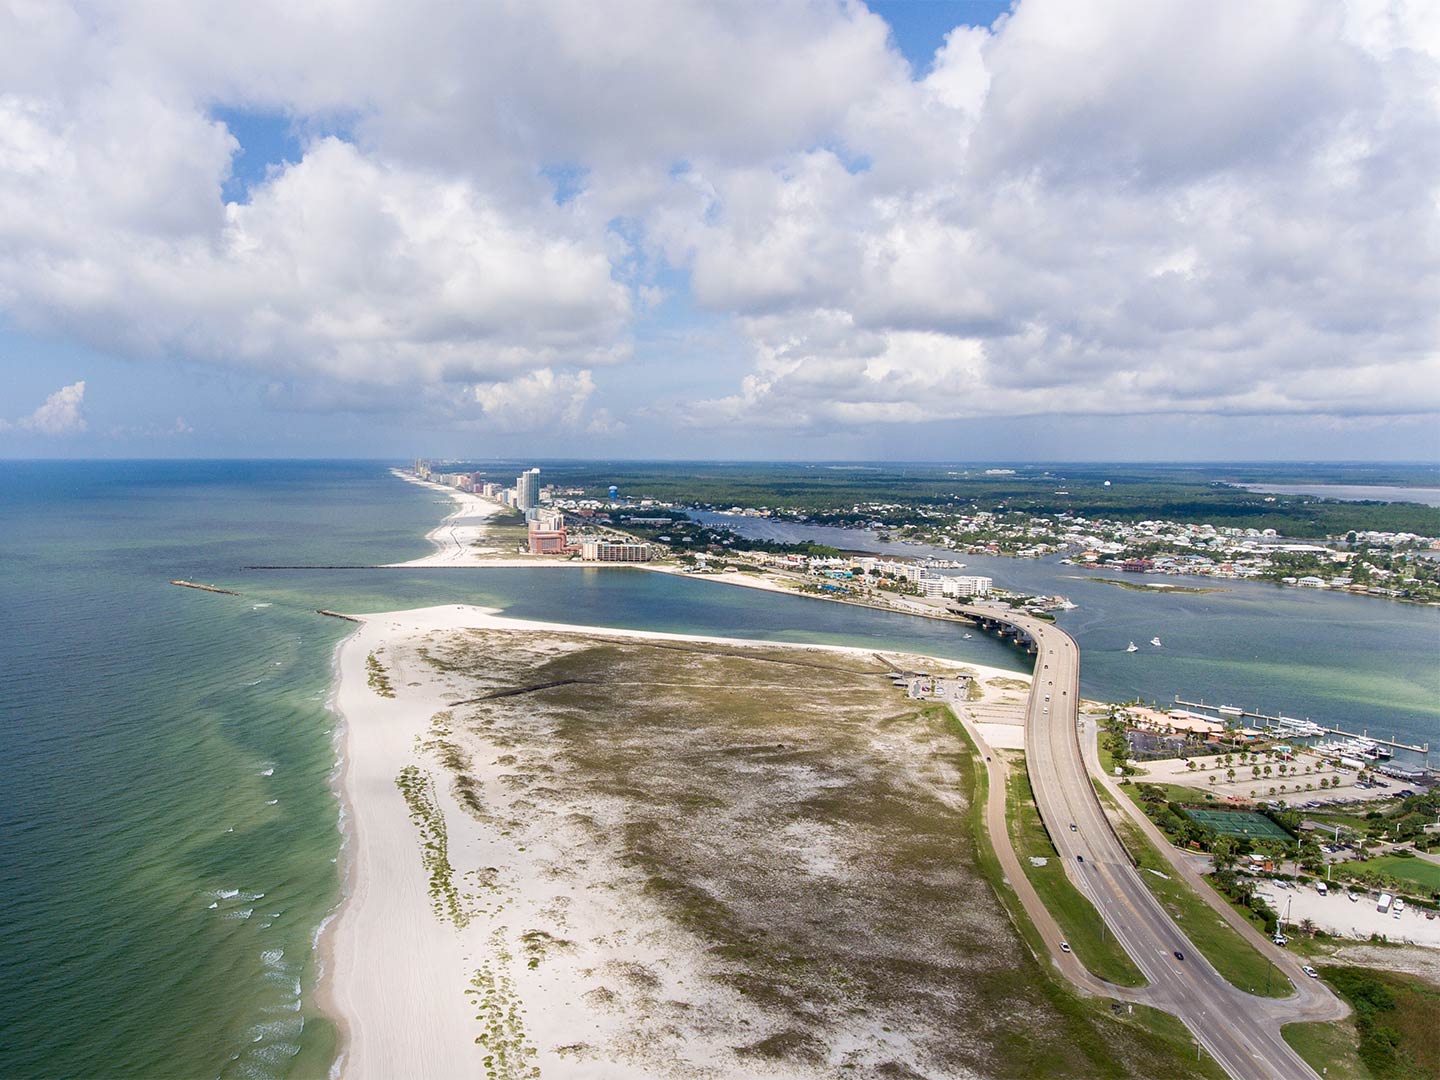 An aerial view of Orange Beach with the Gulf of Mexico on the left, a beach in the foreground, and a bridge on the right of the image